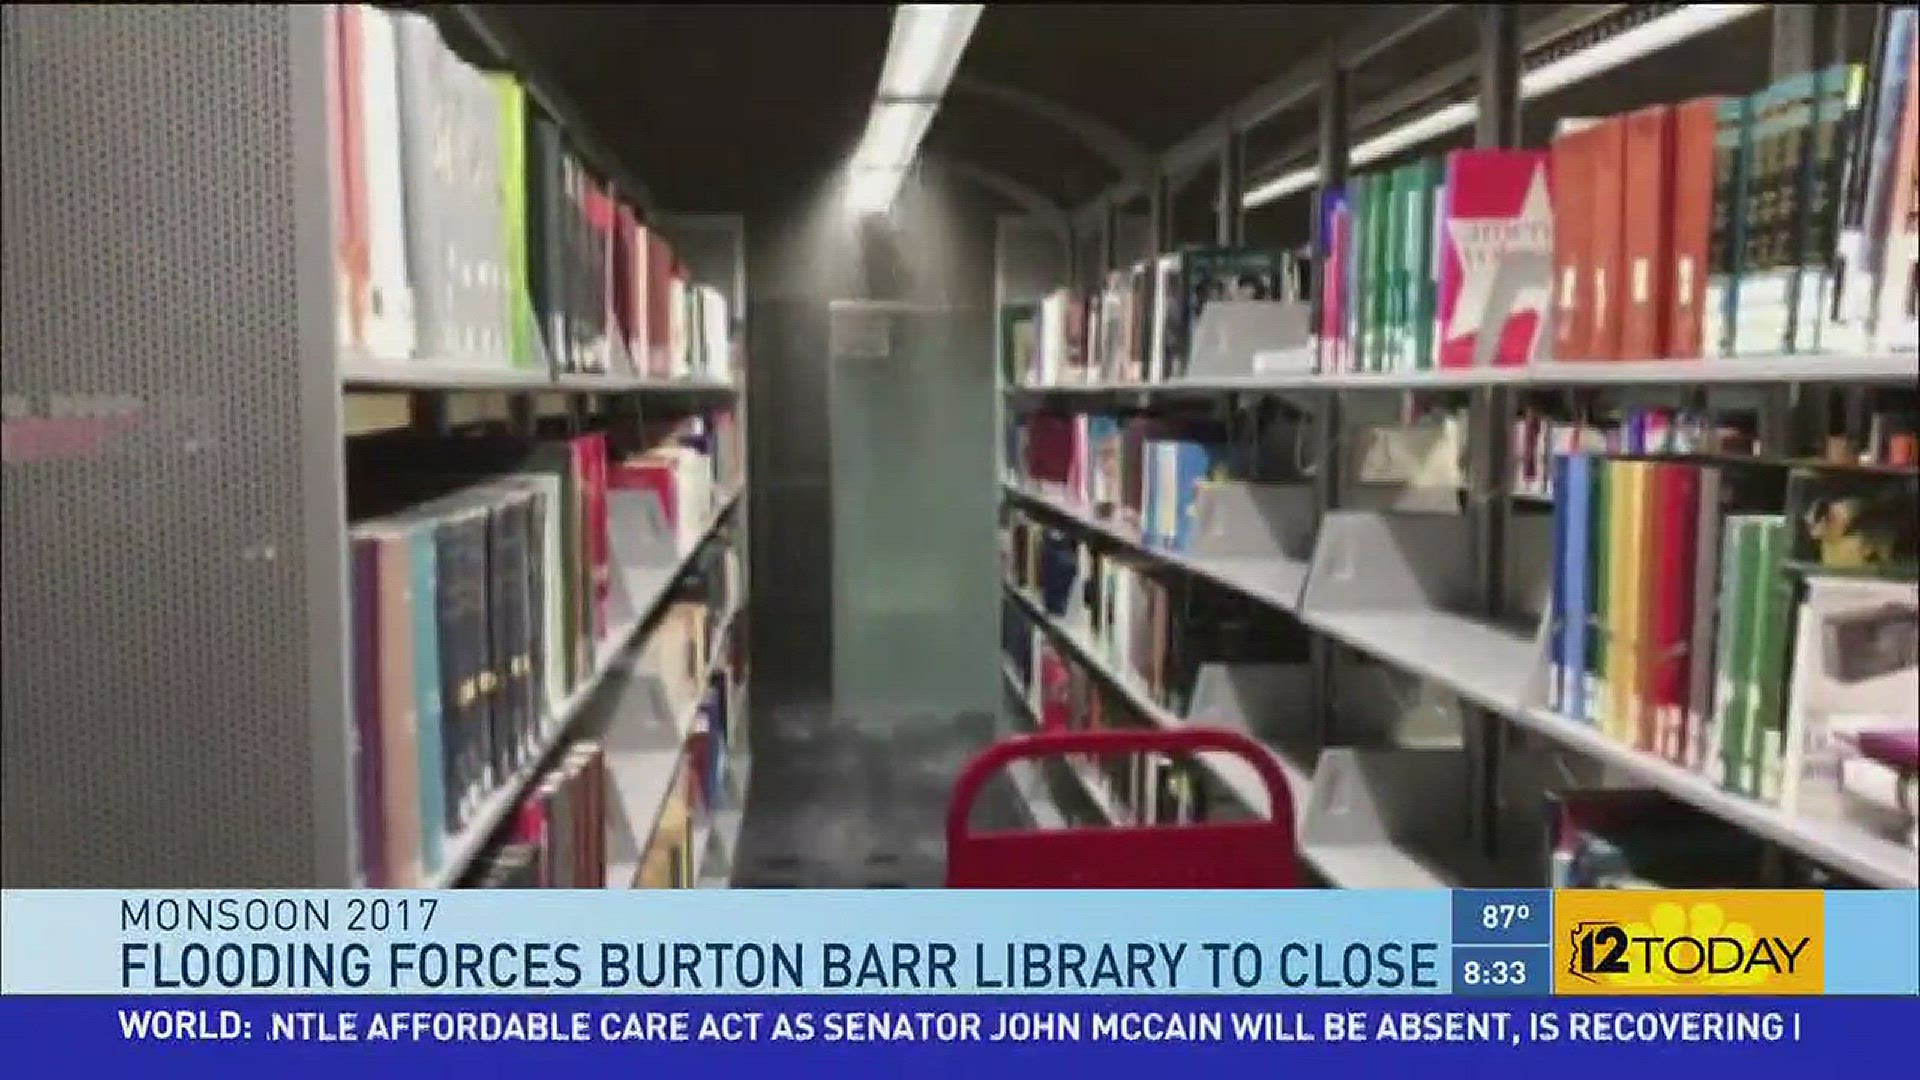 A storm caused damaged to the roof of the Burton Barr Library